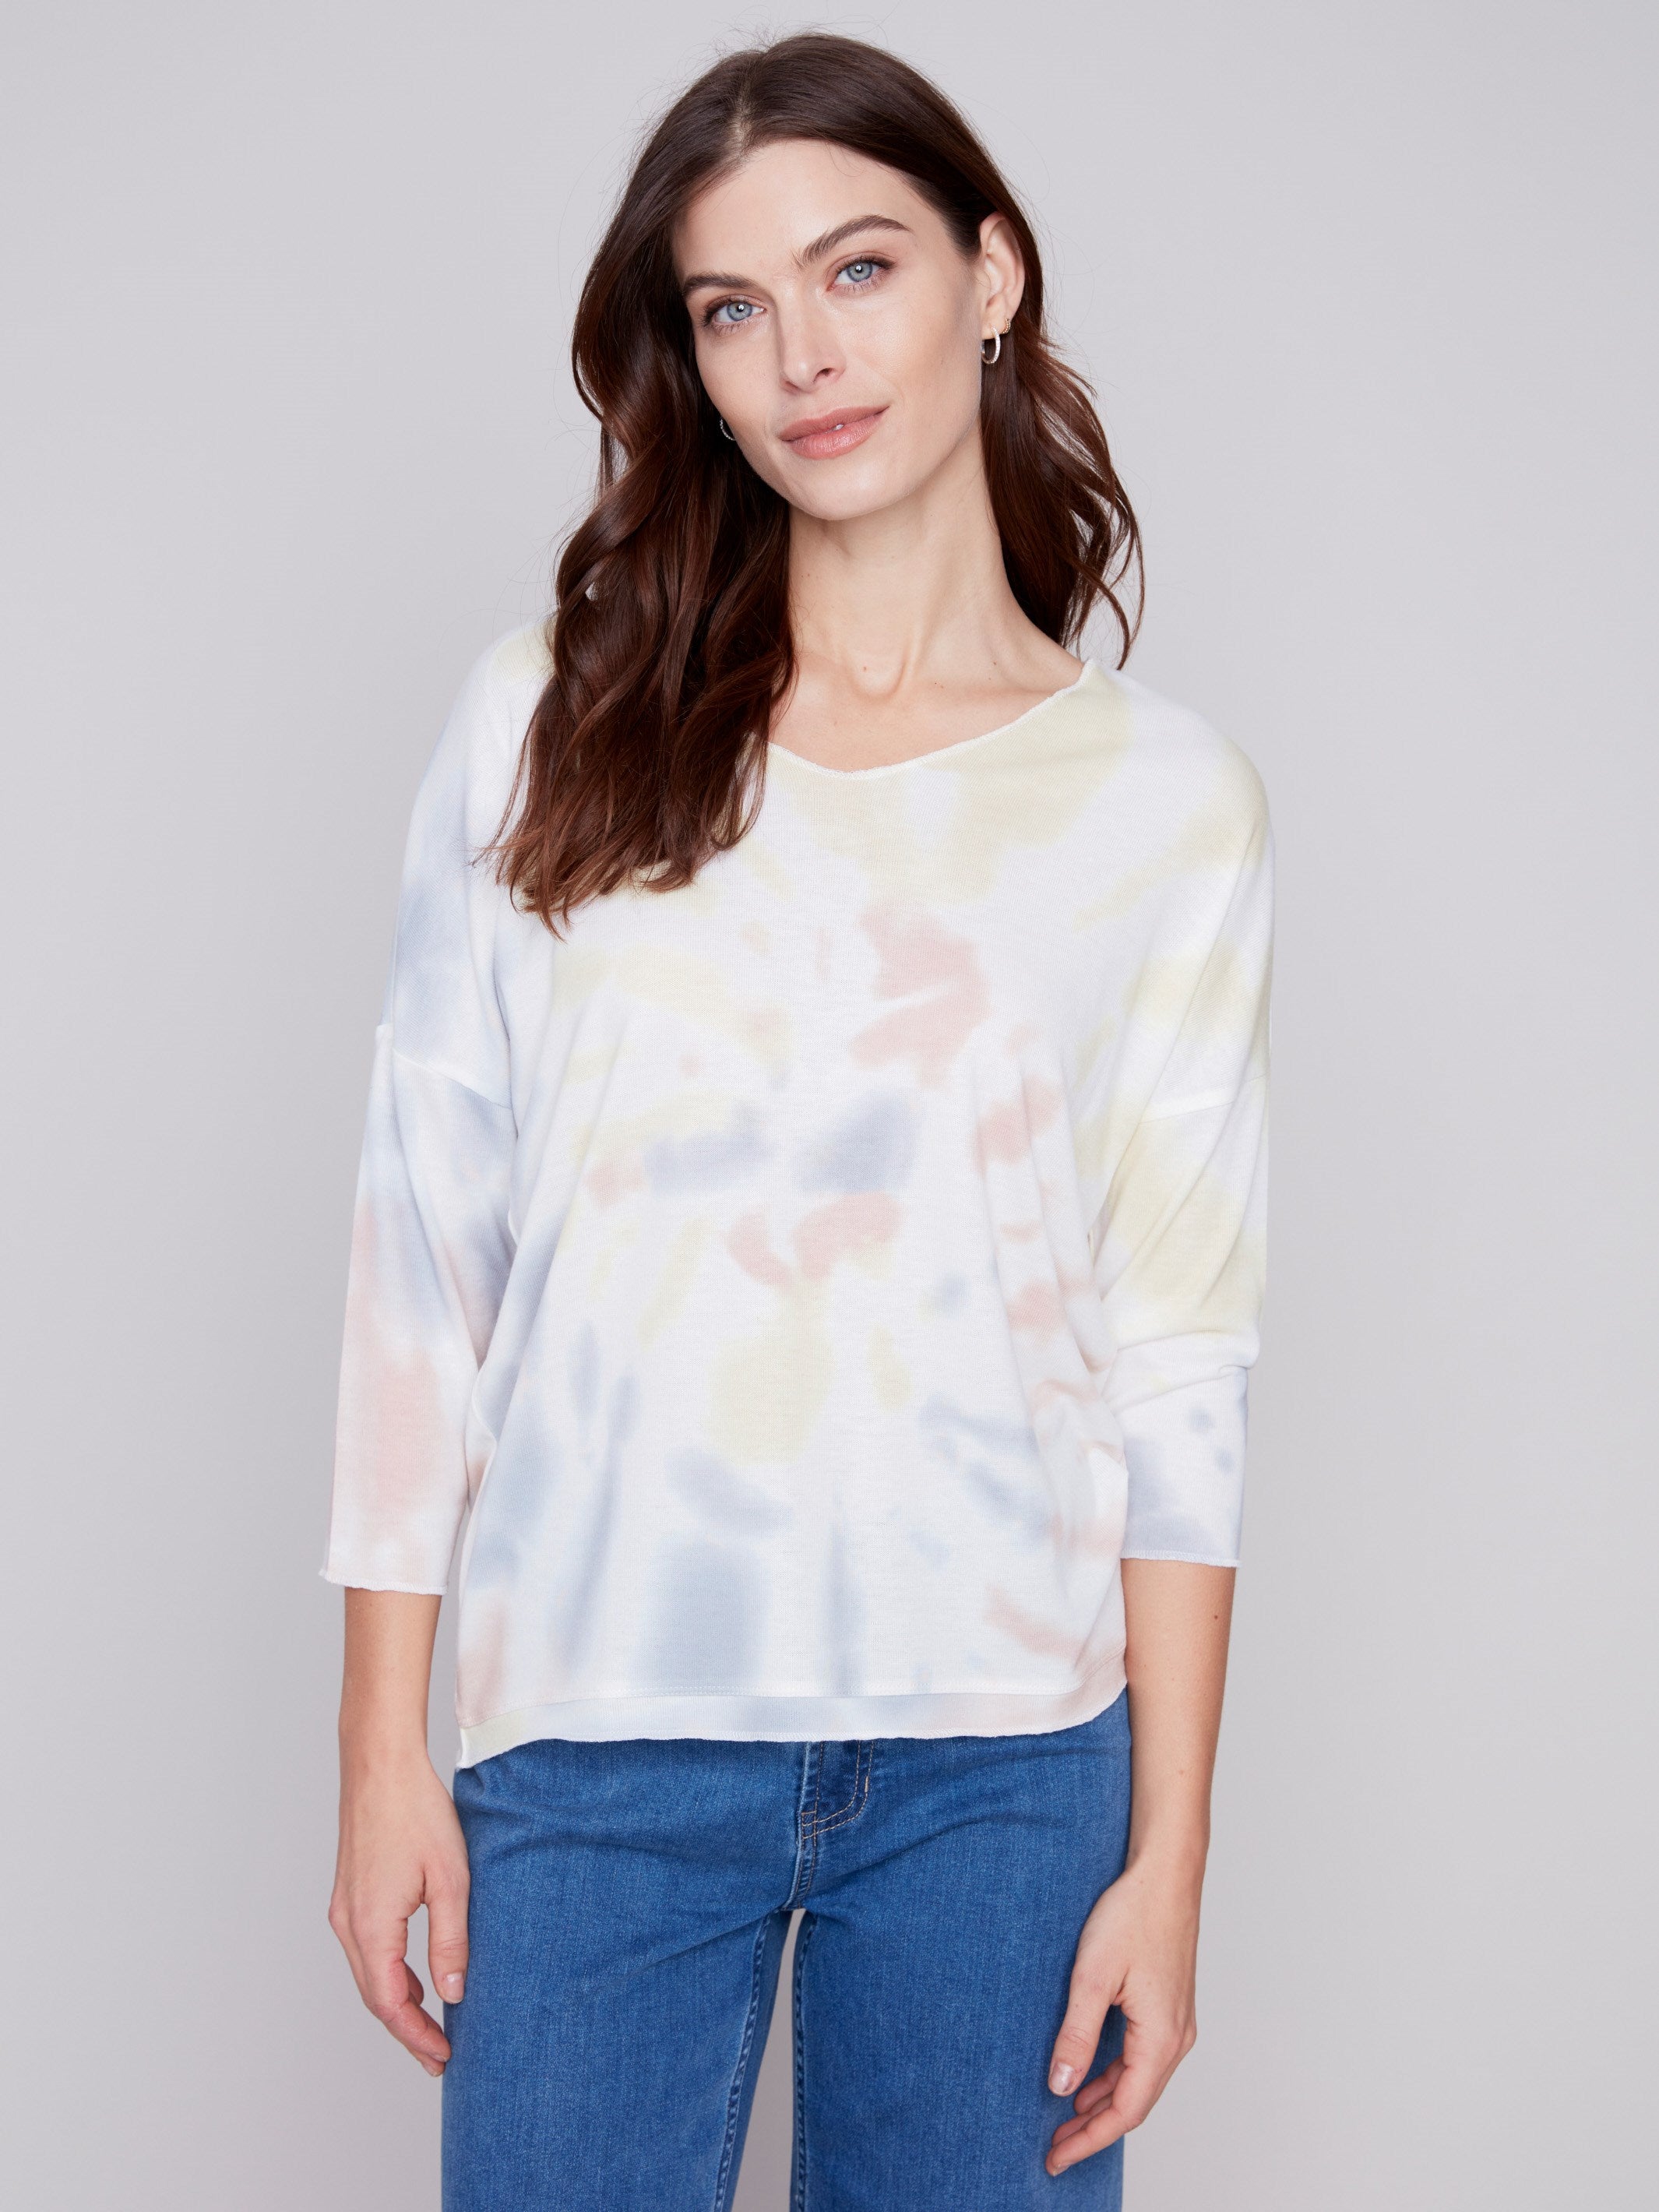 Tie Dye V-Neck Knit Top - Tulip - Charlie B Collection Canada - Image 1